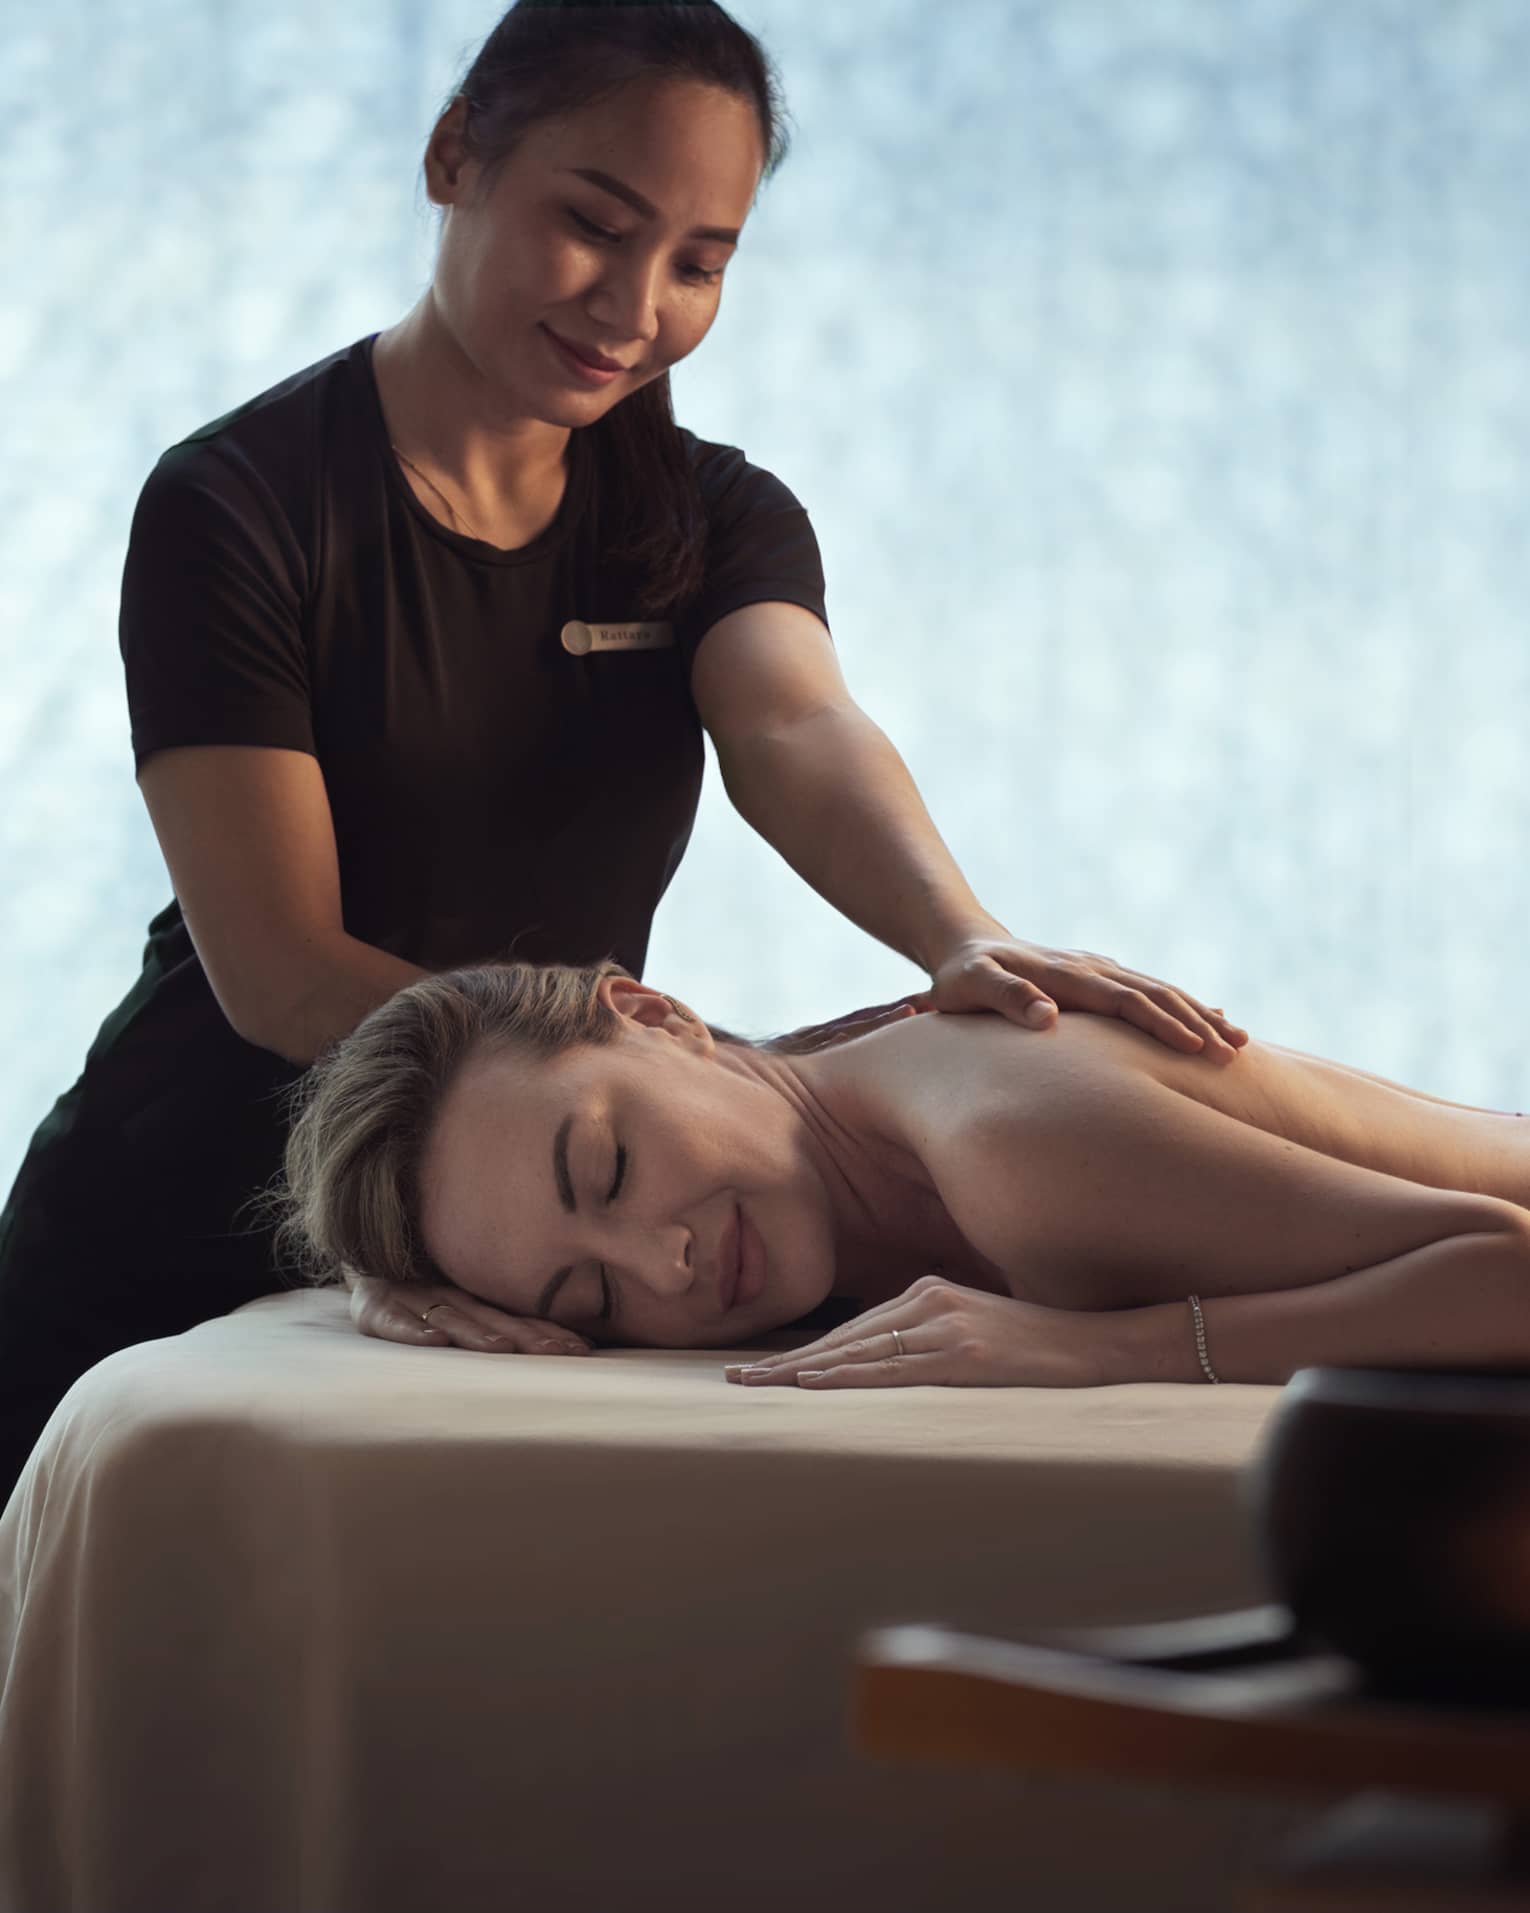 Spa staff massages woman's shoulders as she lays on bed in dark room